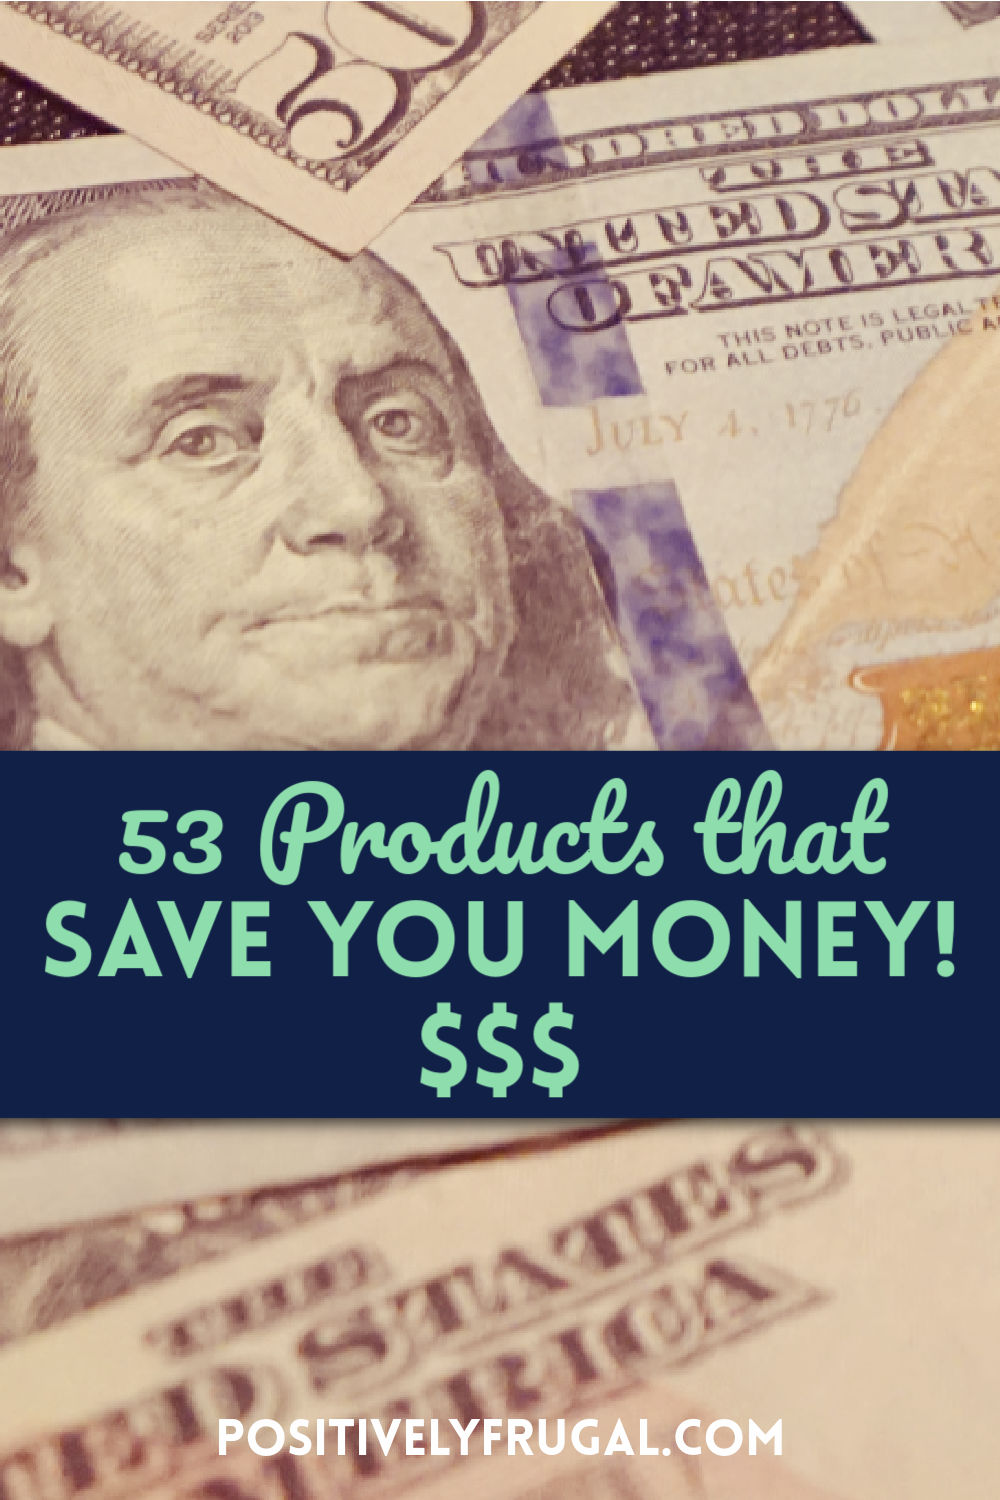 Products that Save You Money by PositivelyFrugal.com